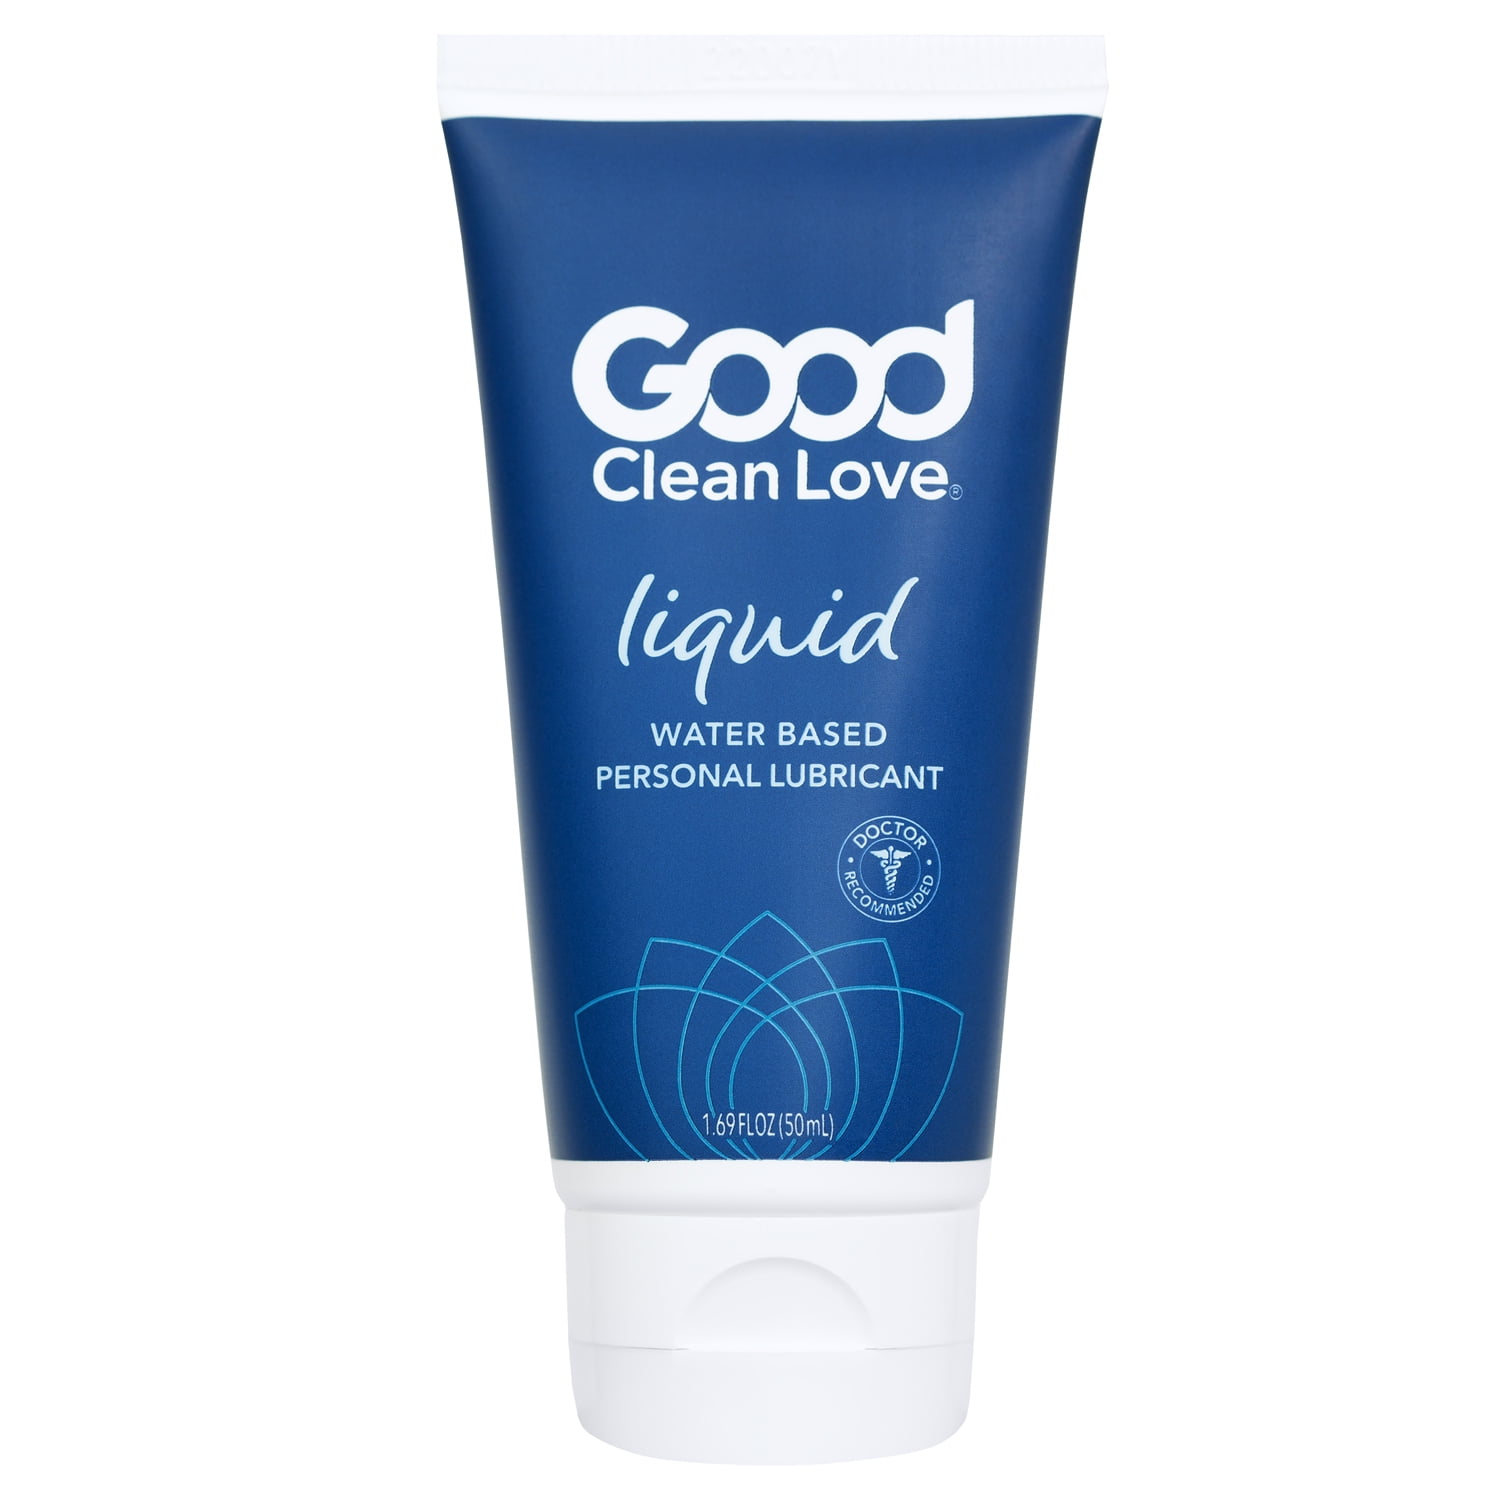 Good Clean Love Liquid Personal Lubricant, Water-Based Lube with Hyaluronic Acid, Sexual Wellness Gel for Men and Women, 1.69 Oz image